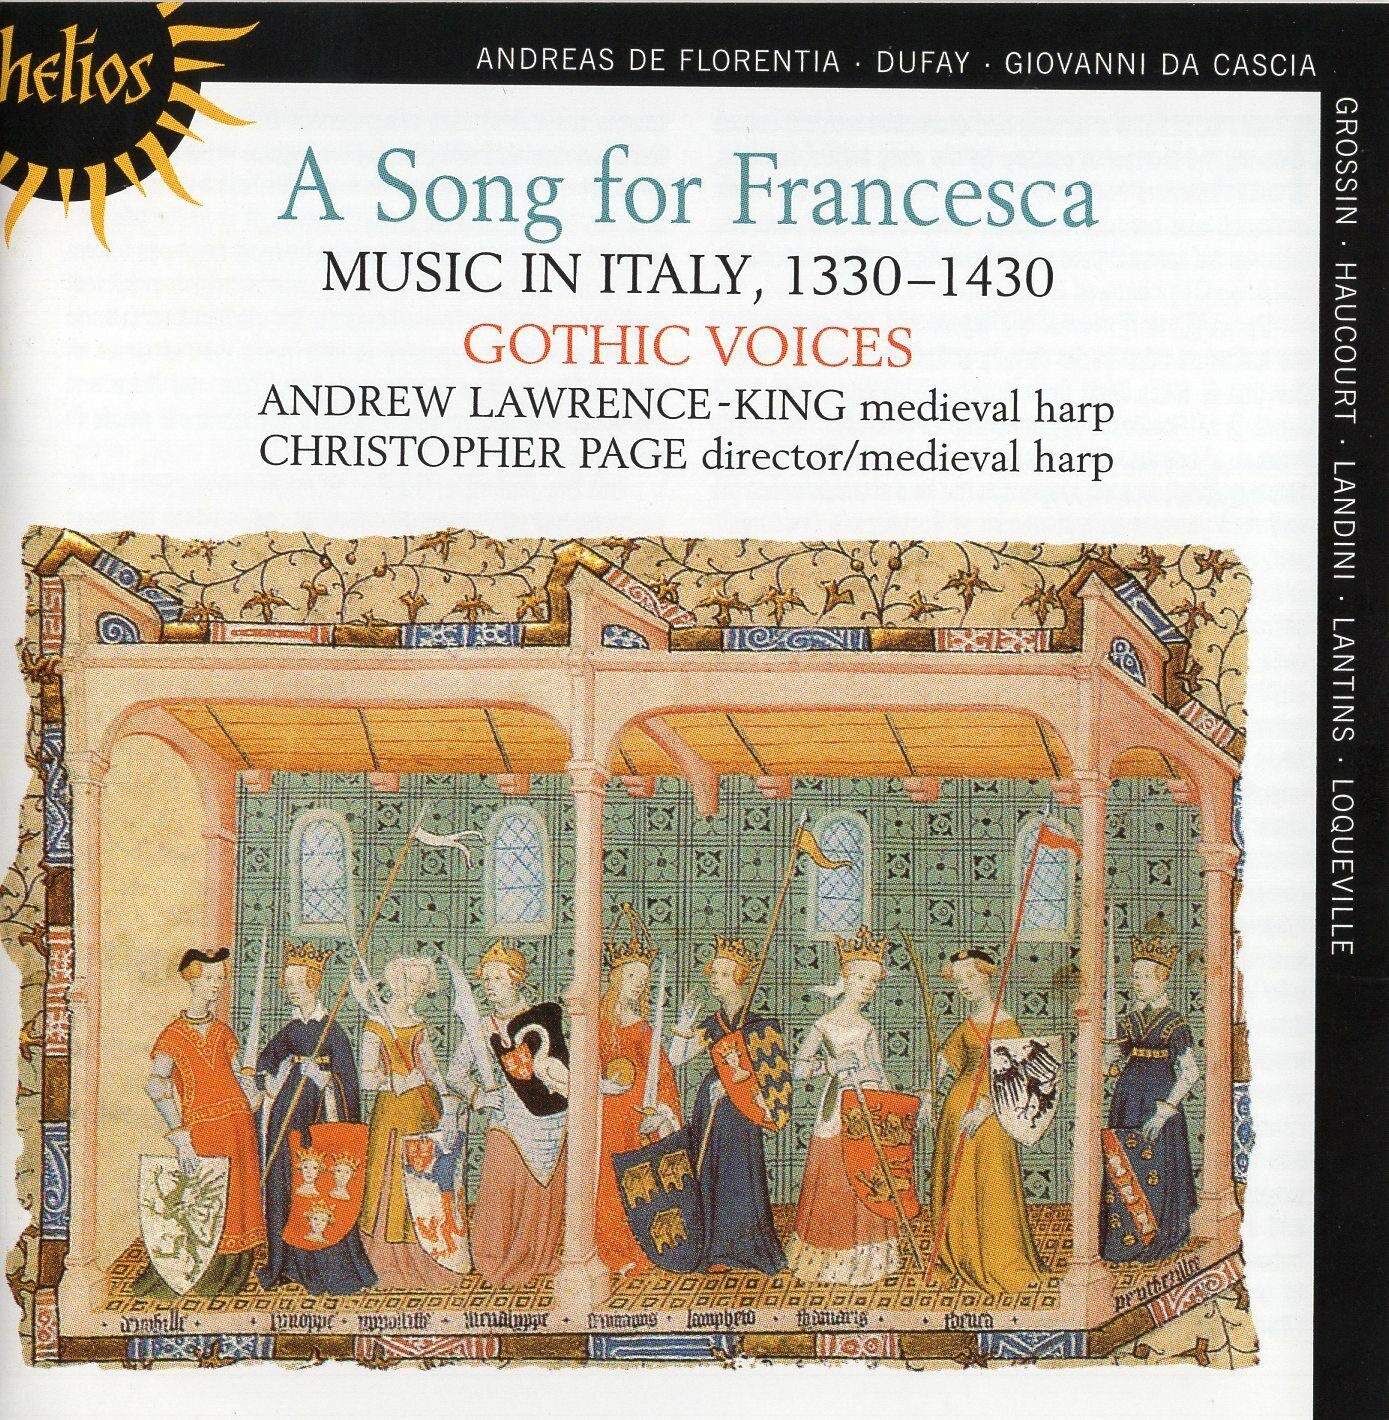 A Song for Francesca - Music in Italy, 1330-1430 / Gothic Voices